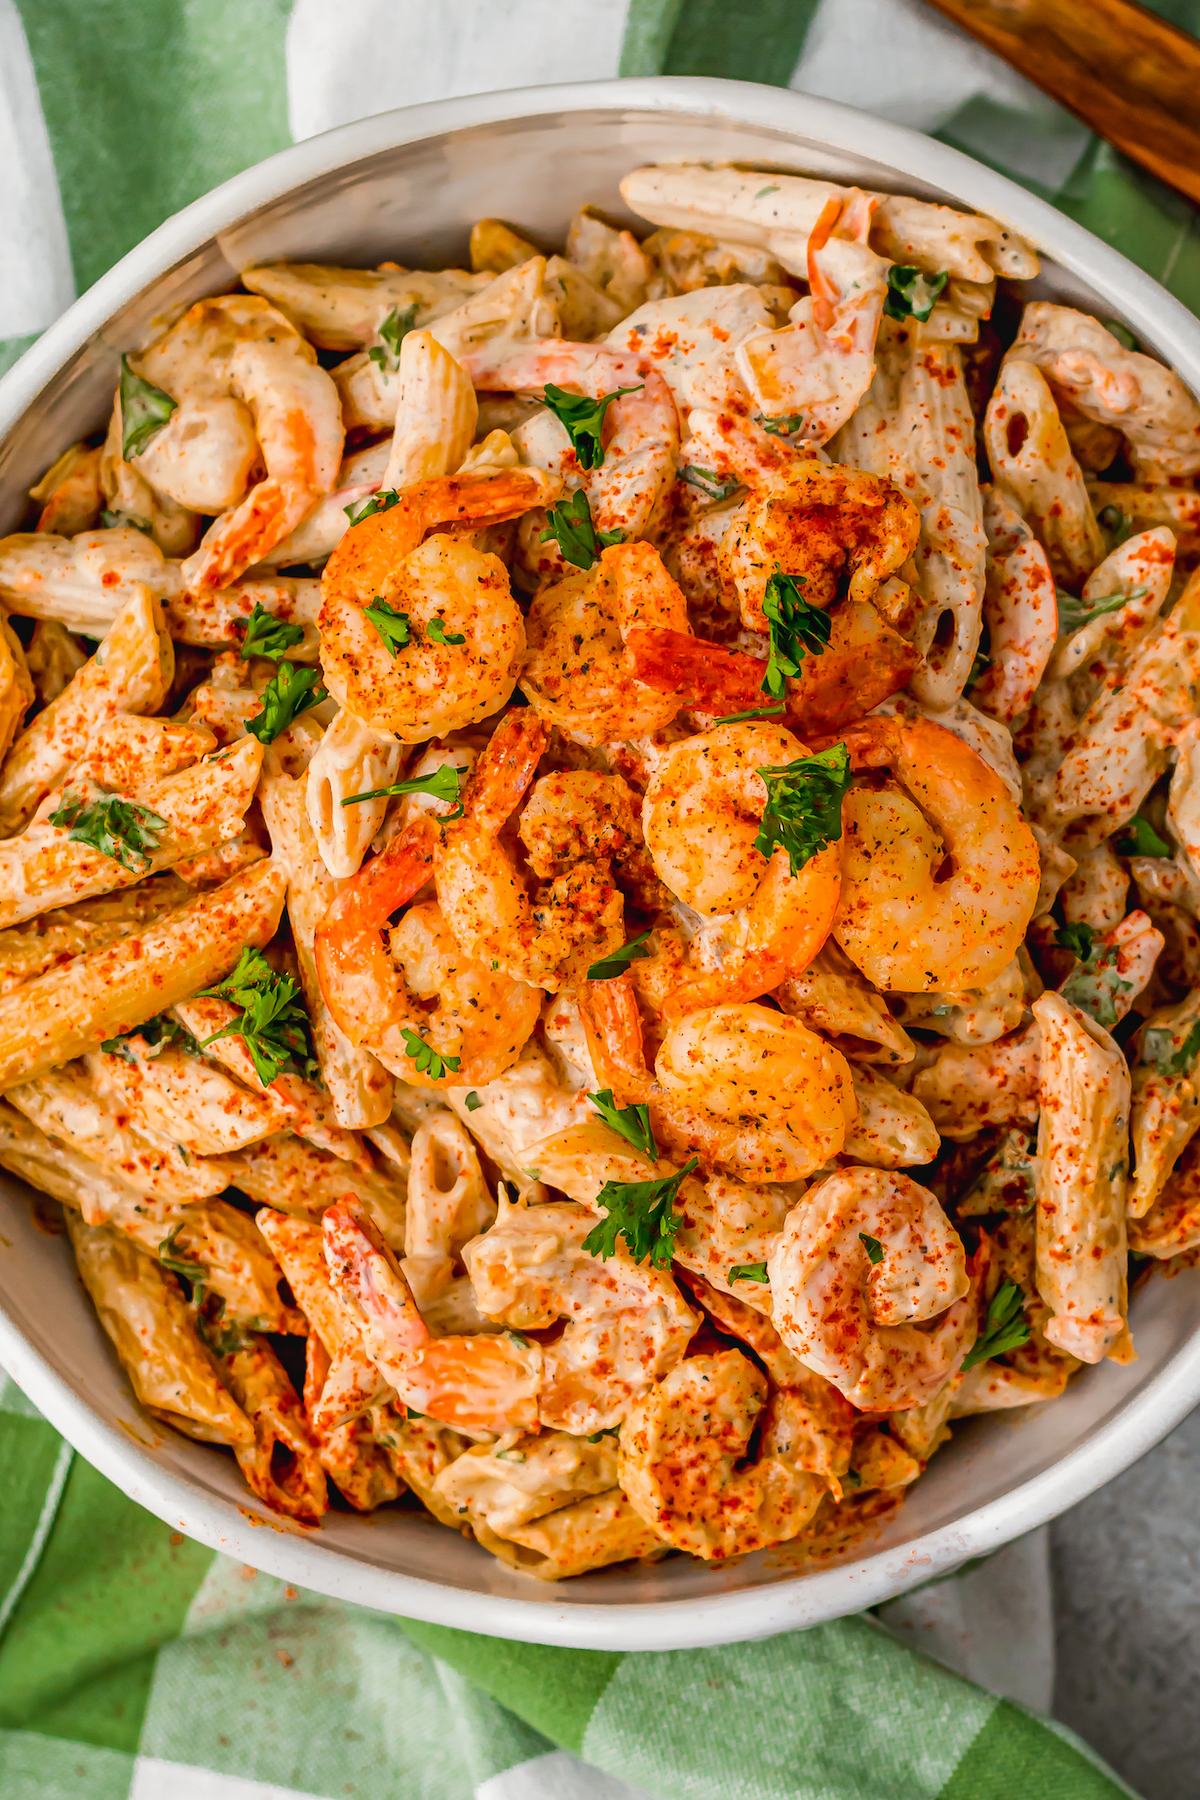 A bowl of penne pasta in creamy sauce with shrimp.